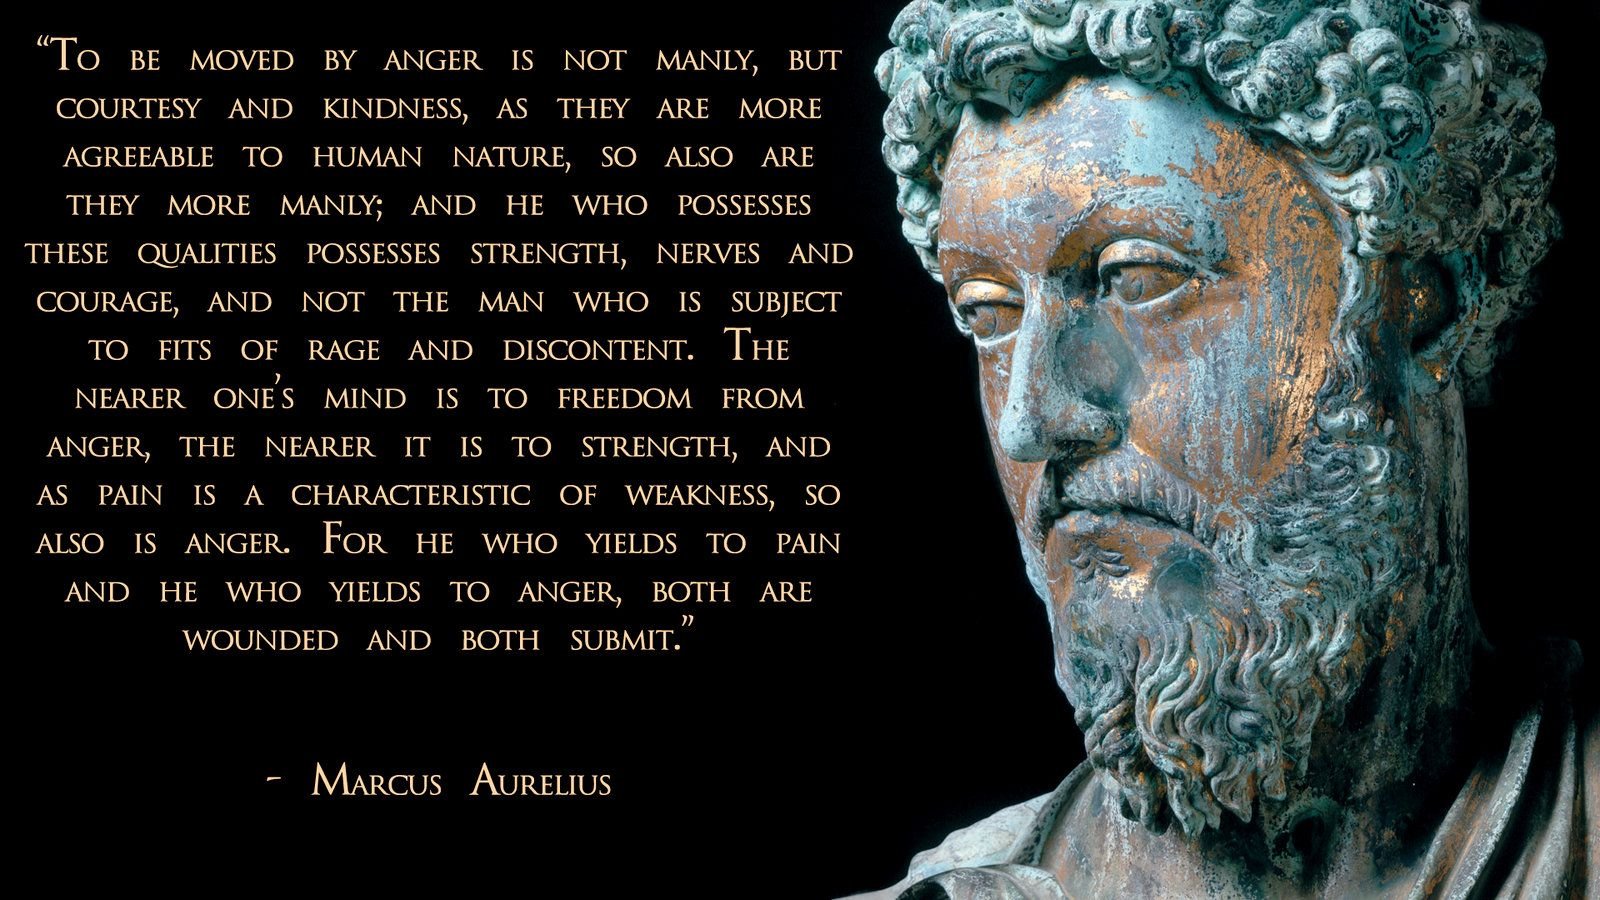 Stoicism Wallpaper. Stoicism Wallpaper, Stoicism Philosophy Background and Stoicism Quotes Wallpaper